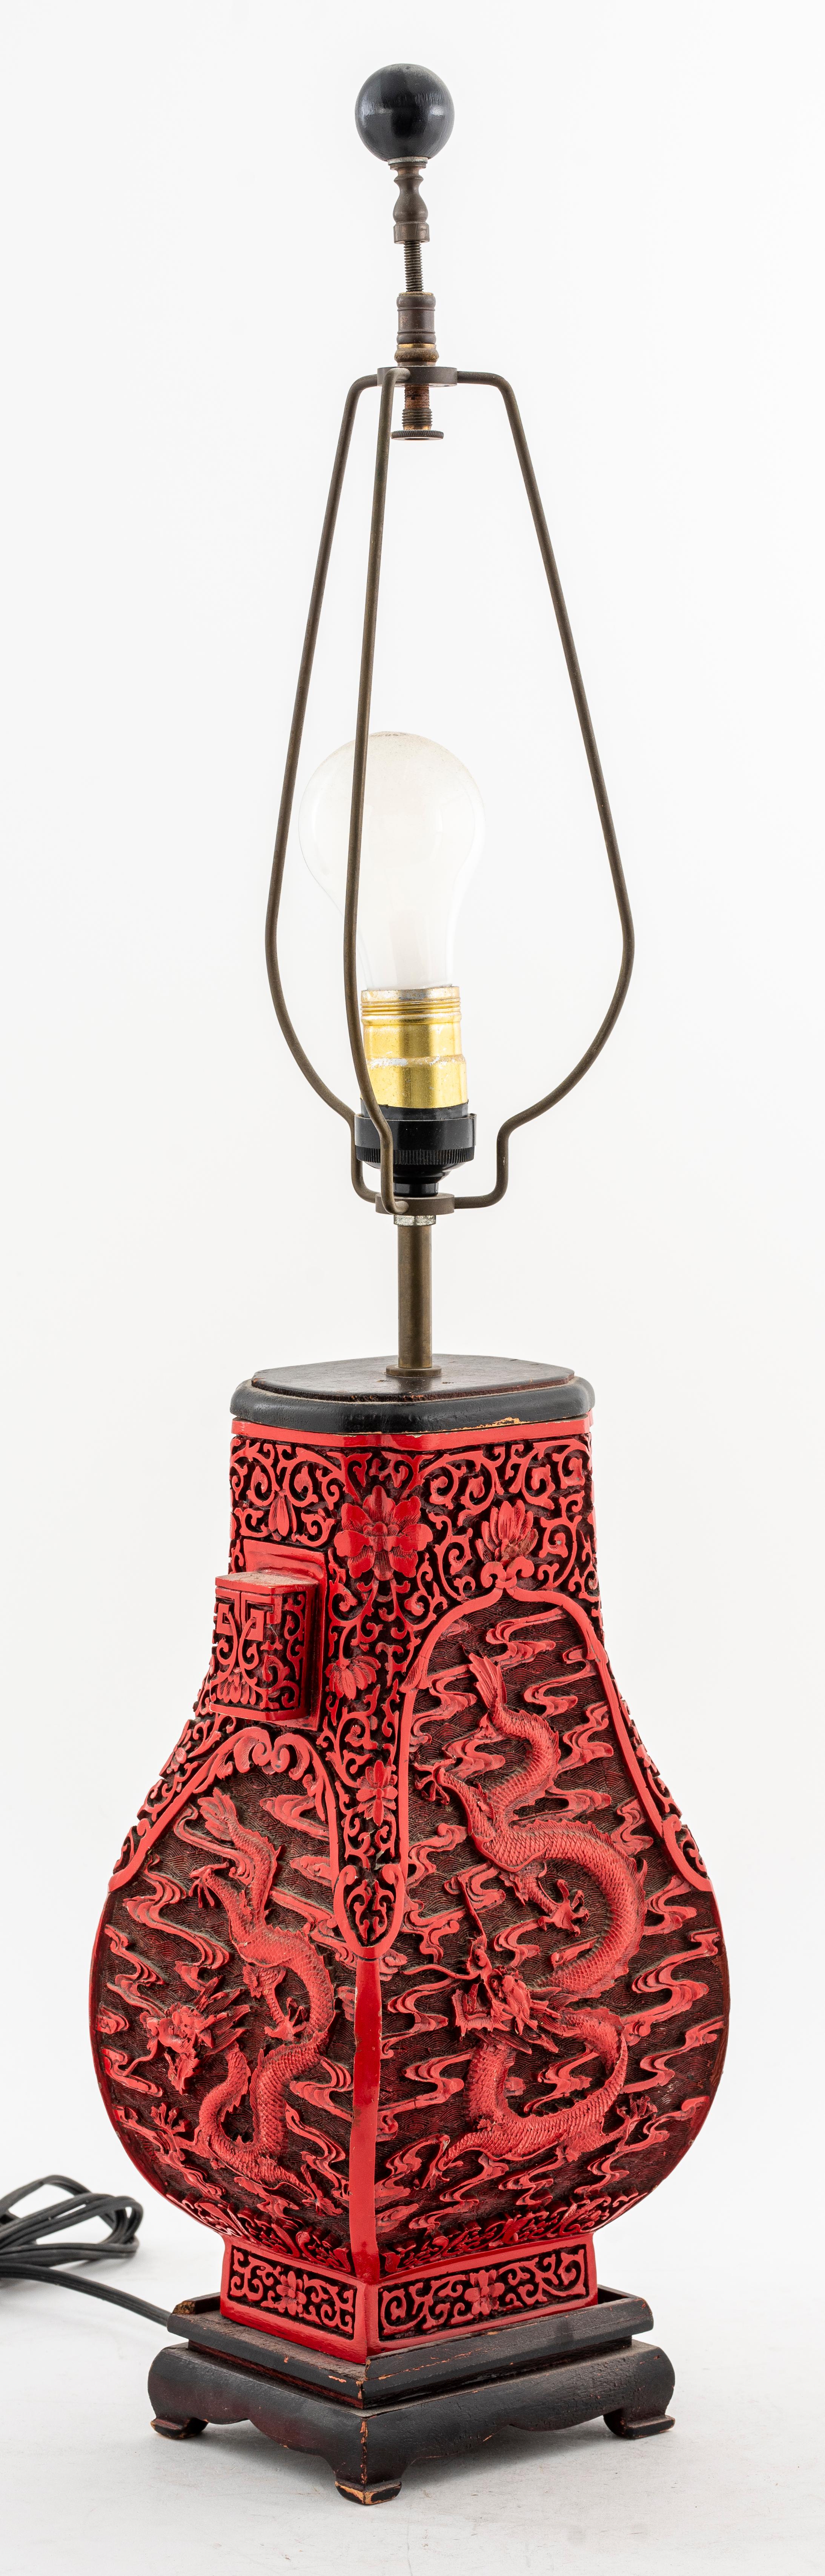 Chinese Cinnabar Lamp with Dragon Motif For Sale 1